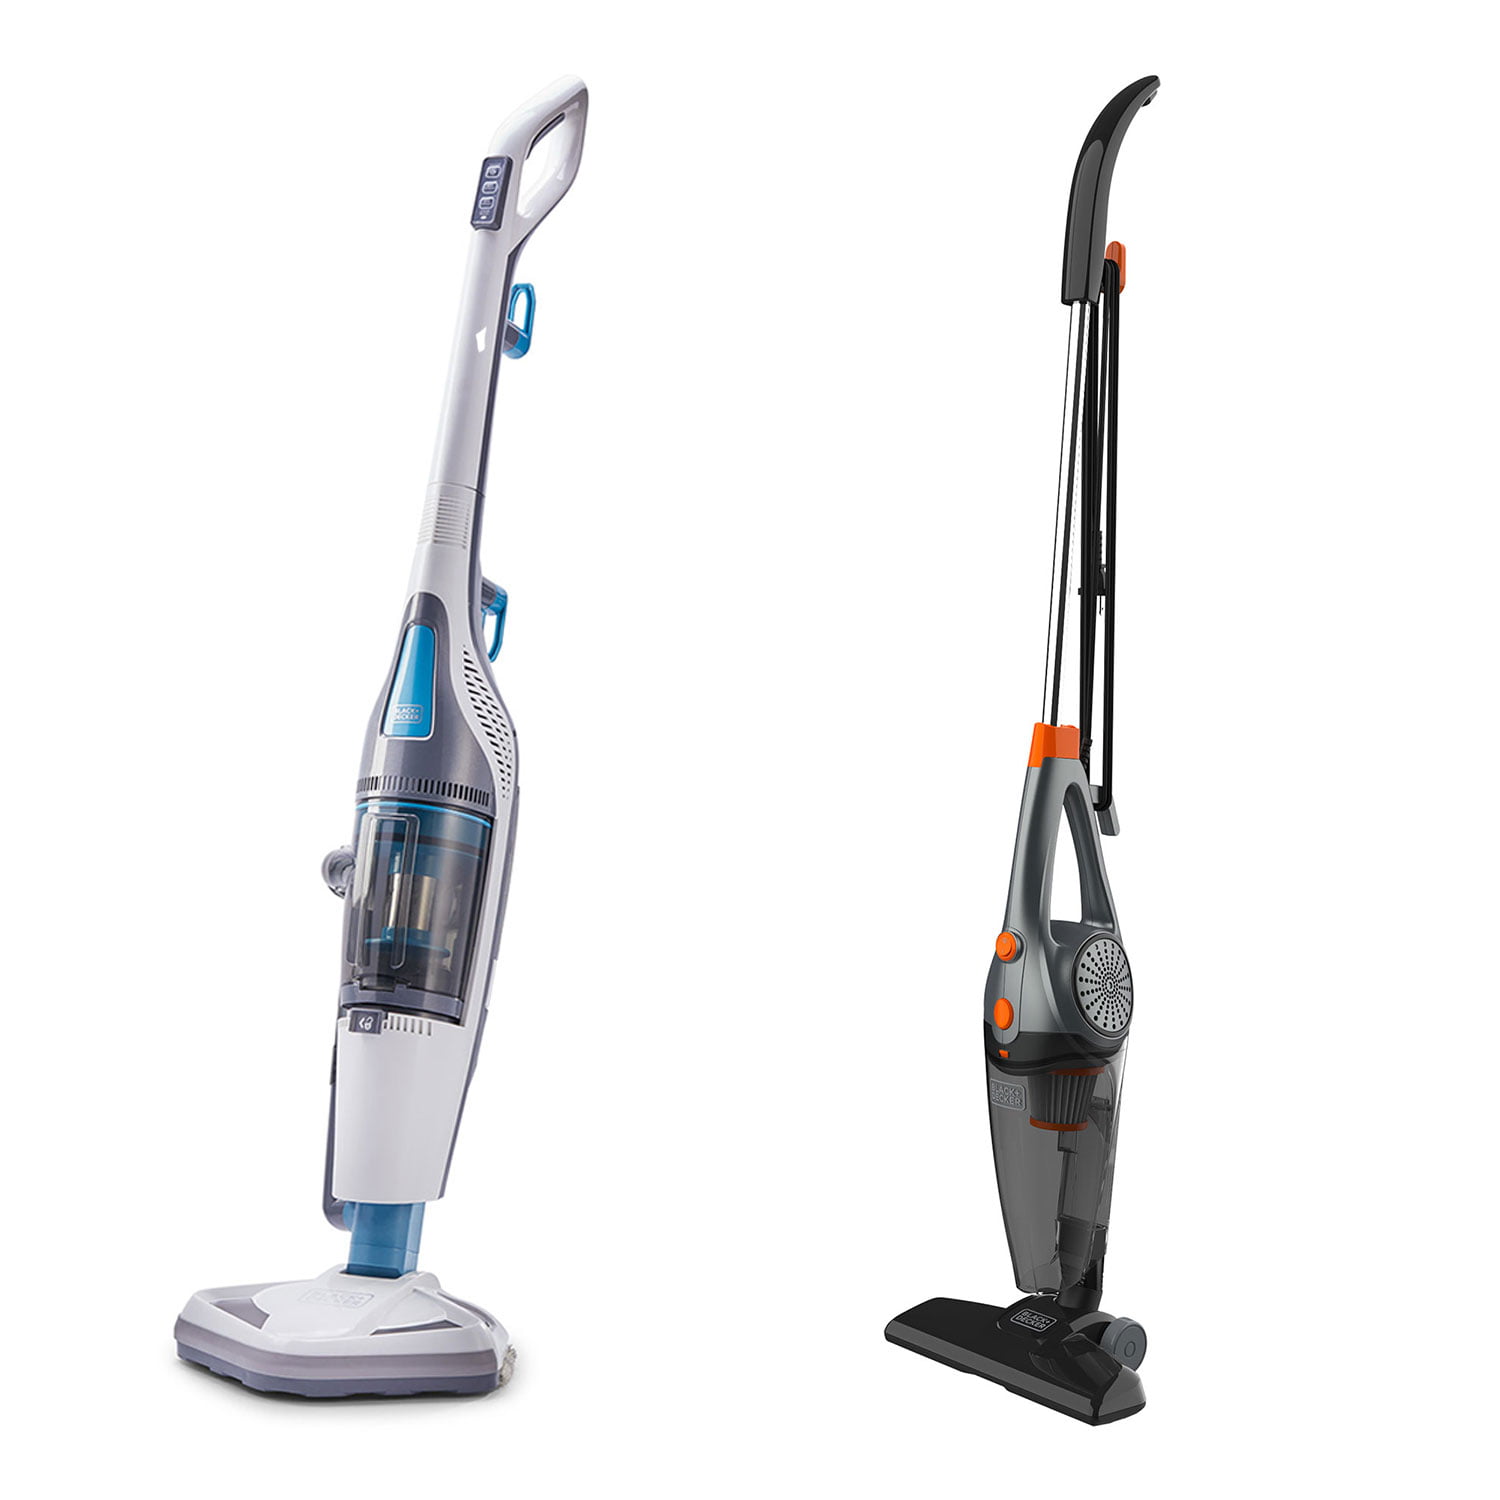 Steam Vacuum Cleaner Carpet steam Cleaner，steam mop Vacuum & Steam All-in-One Corded 1600W 17 kPa Upright Bagless Vacuum Cleaner and Steam Mop for Tile and Hardwood Carpet with 2 HEPA Filter